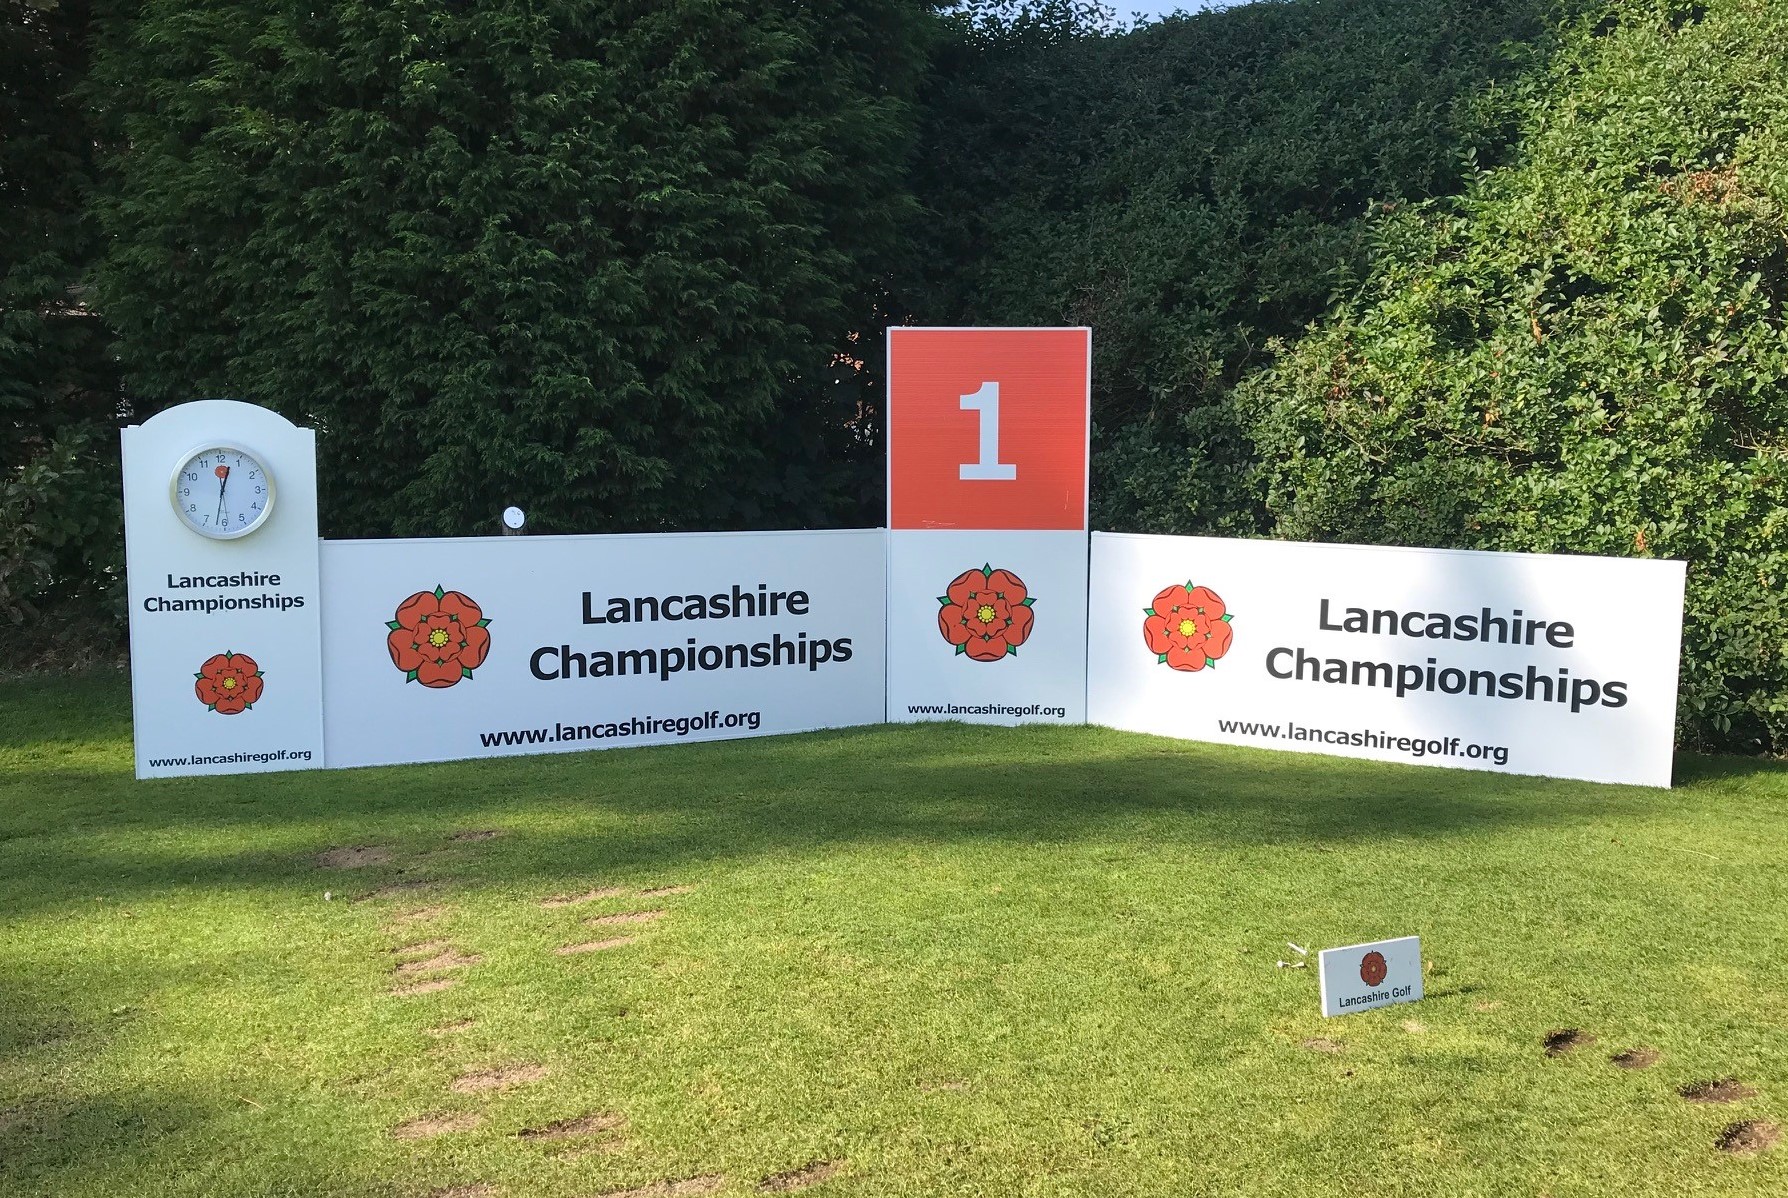 Golf, corporate events, bespoke, events, days, tournament, signage, equipment, sponsorship, branding, charity, scoreboards, leaderboards, on-course